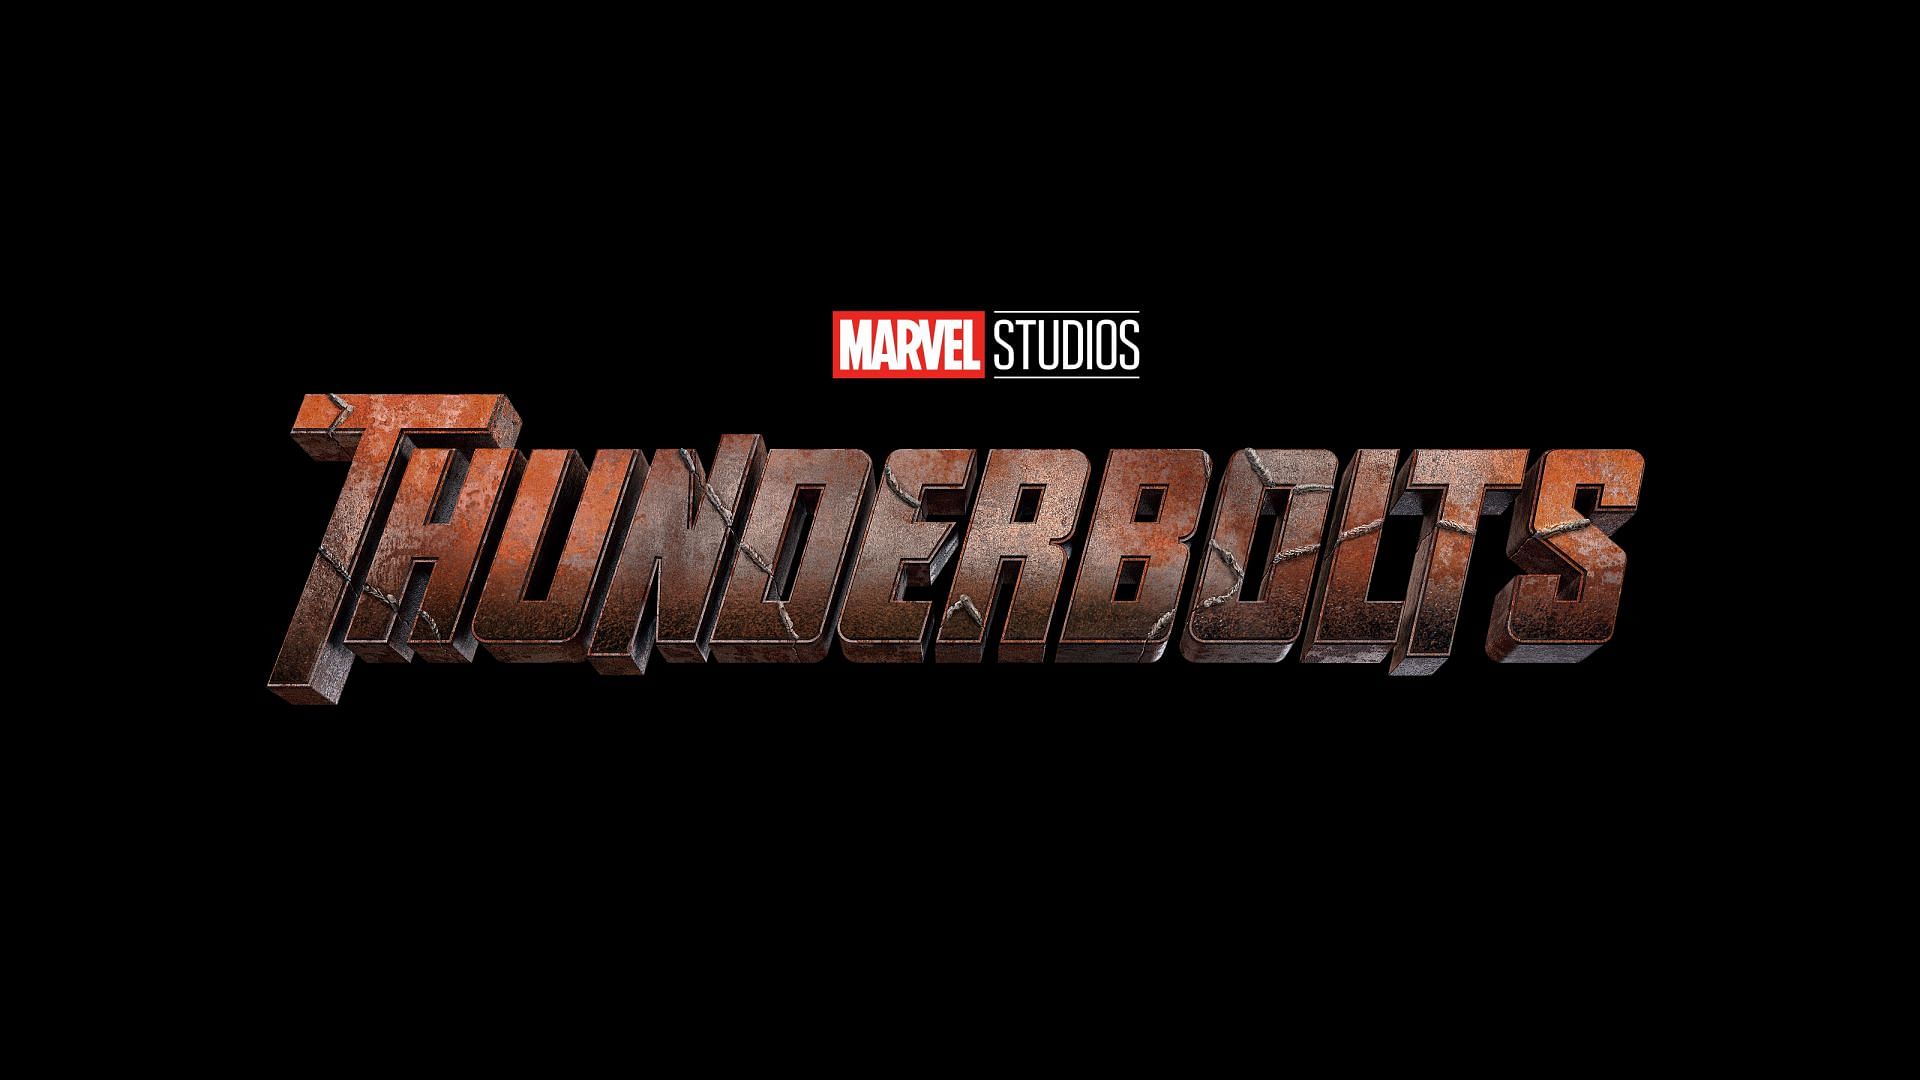 the new superhero movie, Thunderbolts will be on the big screen on July 26. (Image via Marvel)